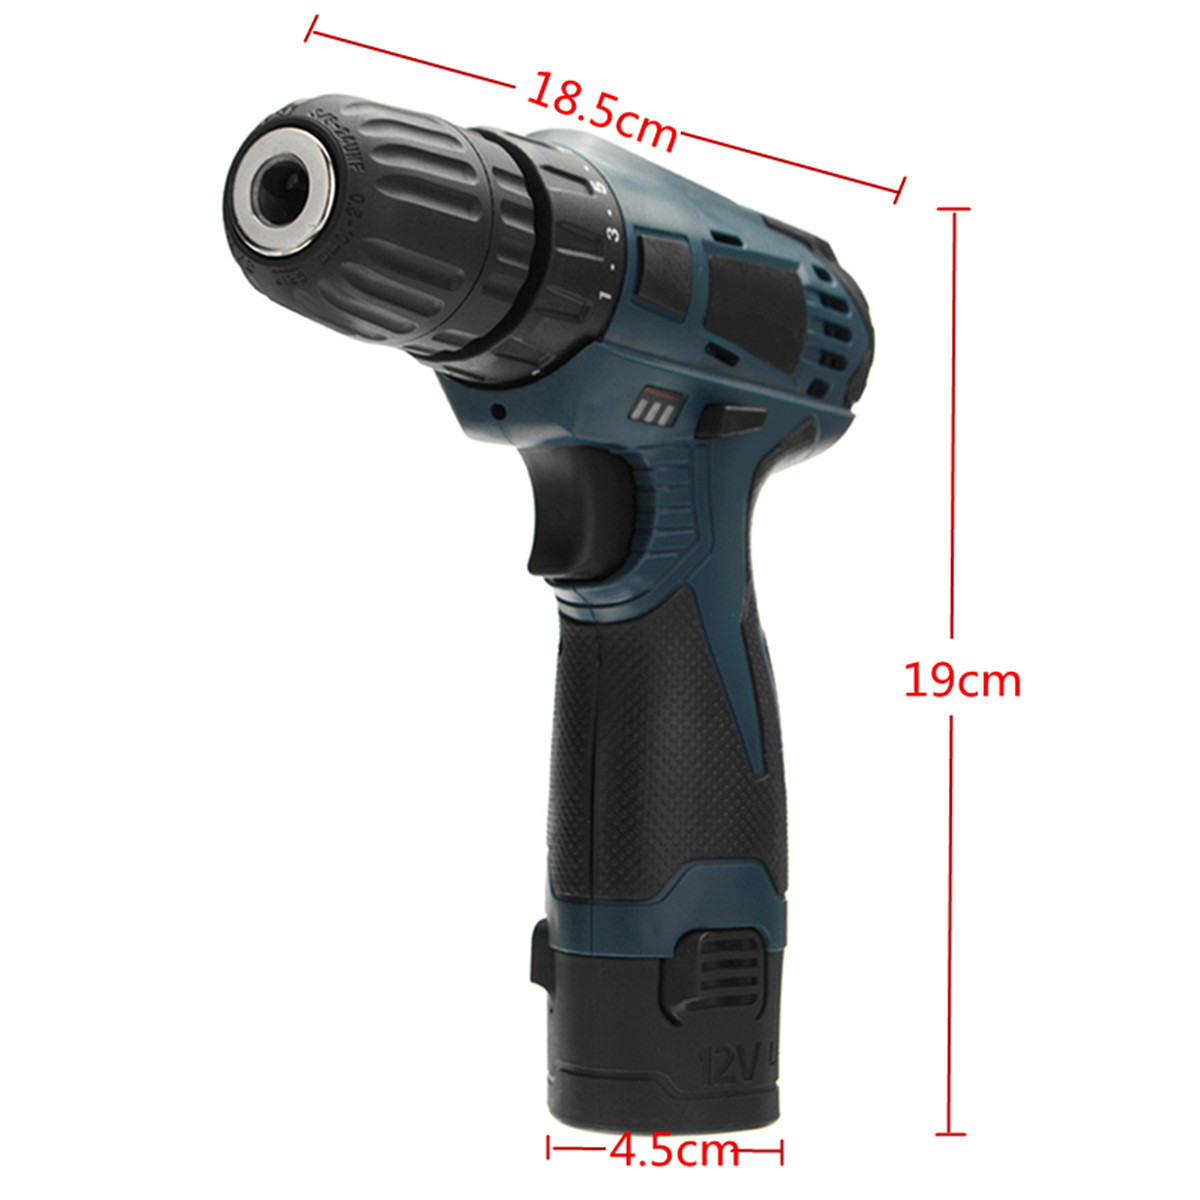 12V-Li-Ion-Cordless-Electric-Screwdriver-Power-Drill-Driver-Hand-Accessories-Kit-2-Speed-LED-Light-1284861-10